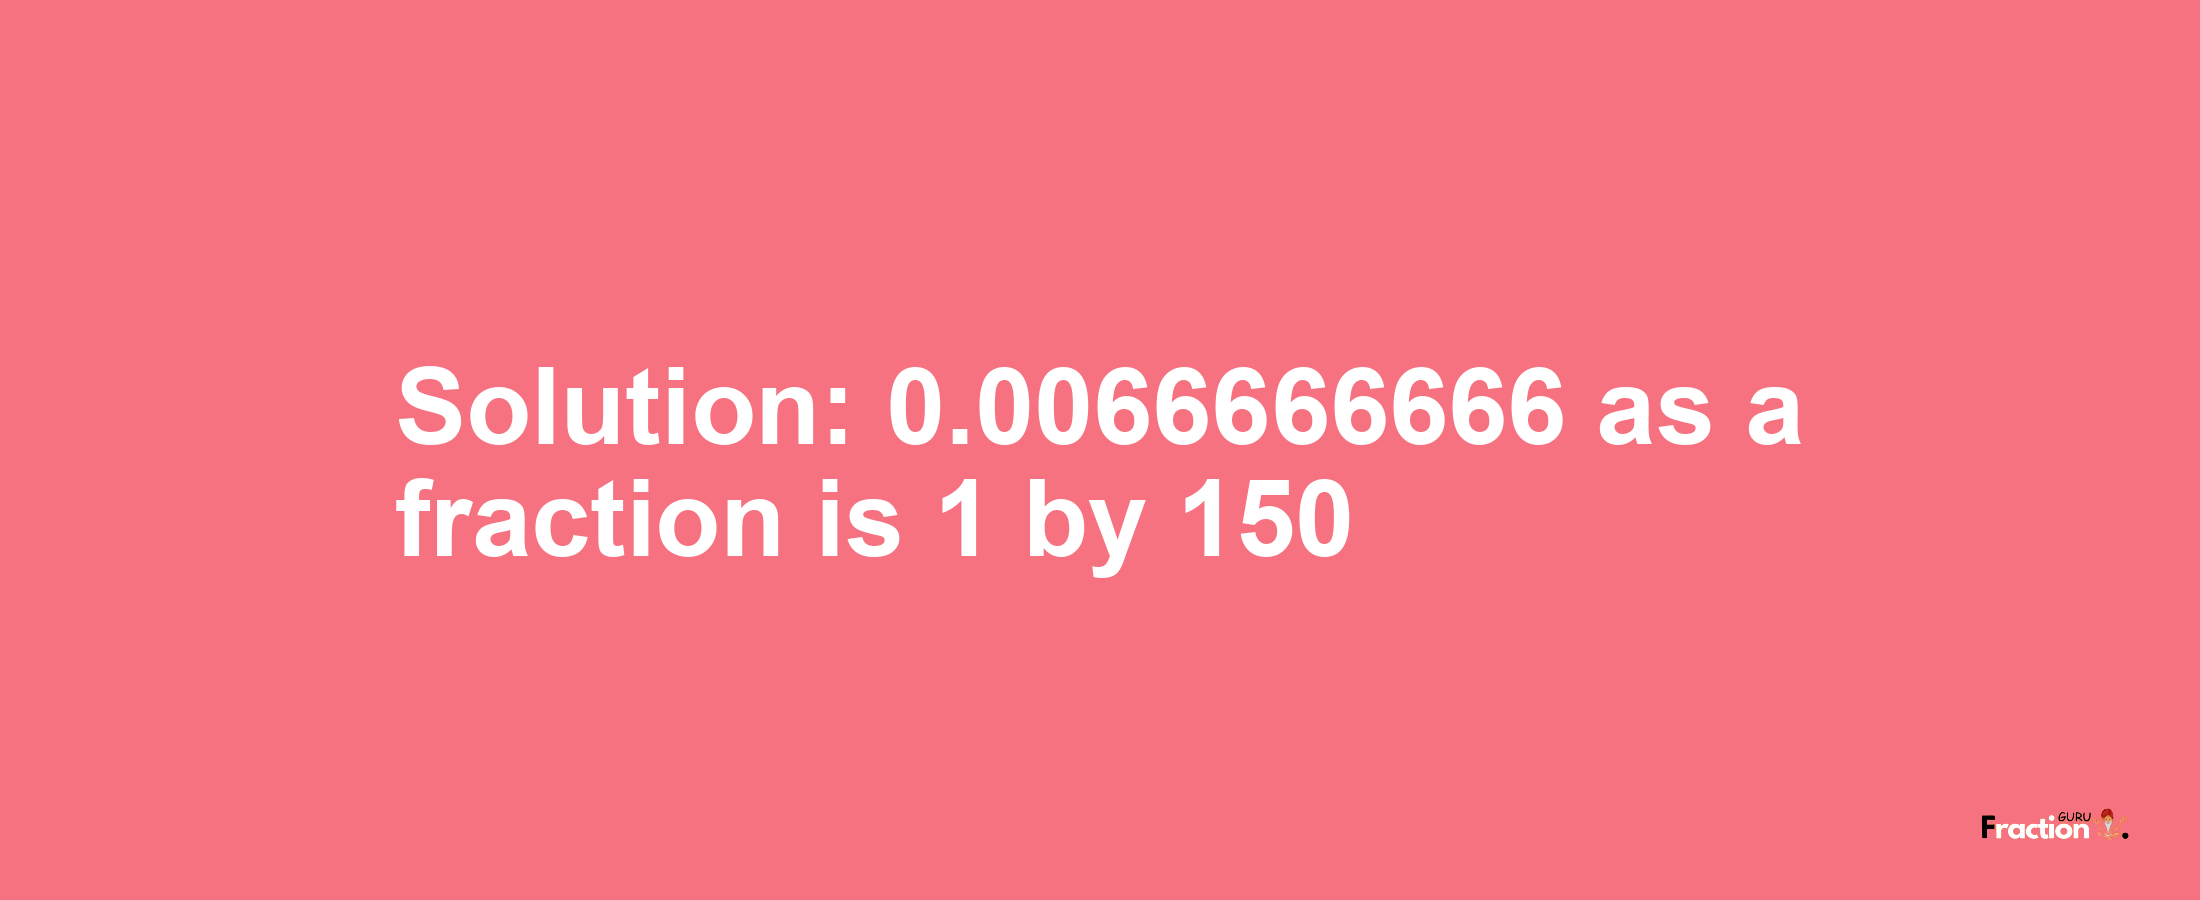 Solution:0.0066666666 as a fraction is 1/150